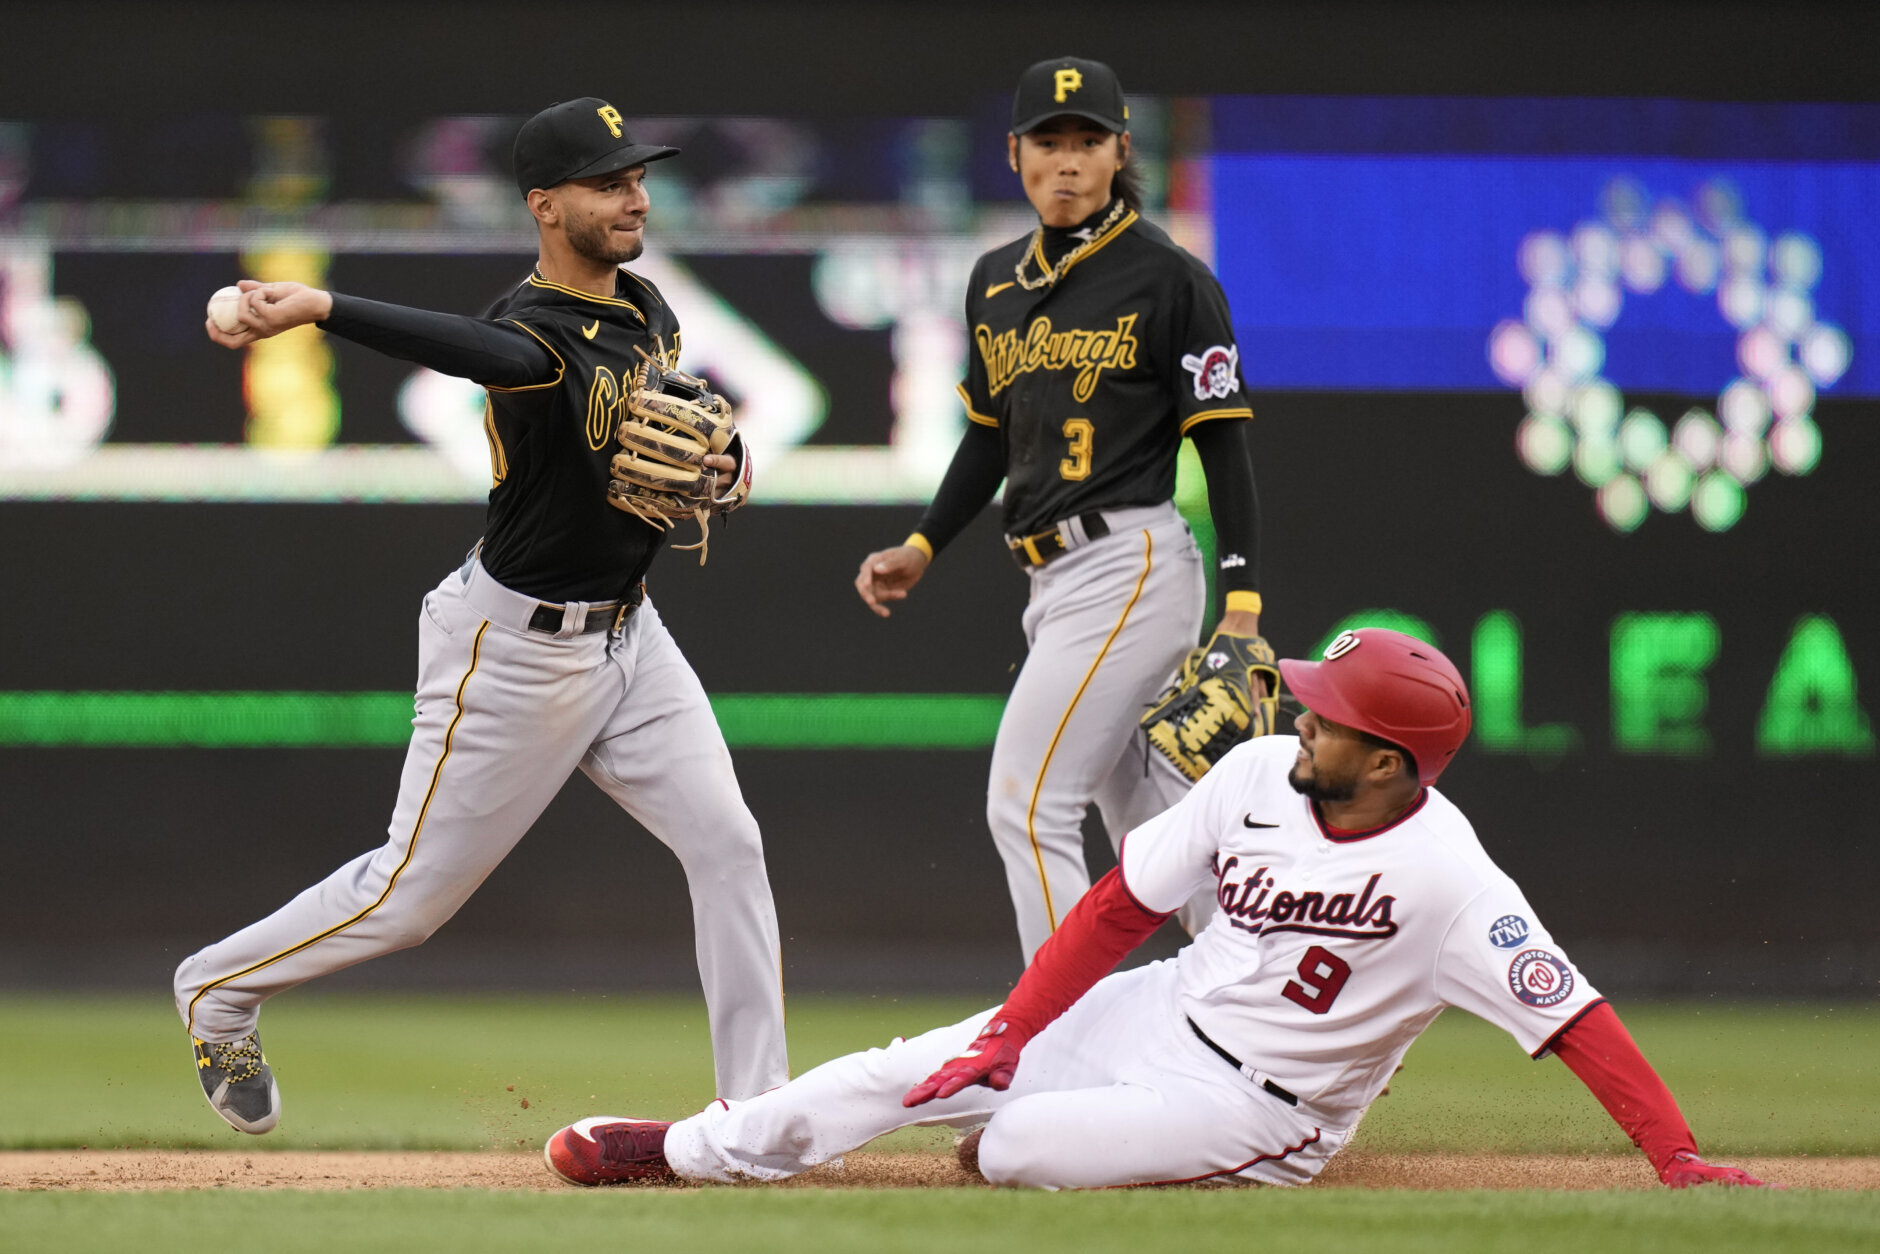 Pirates earn doubleheader sweep over Cardinals